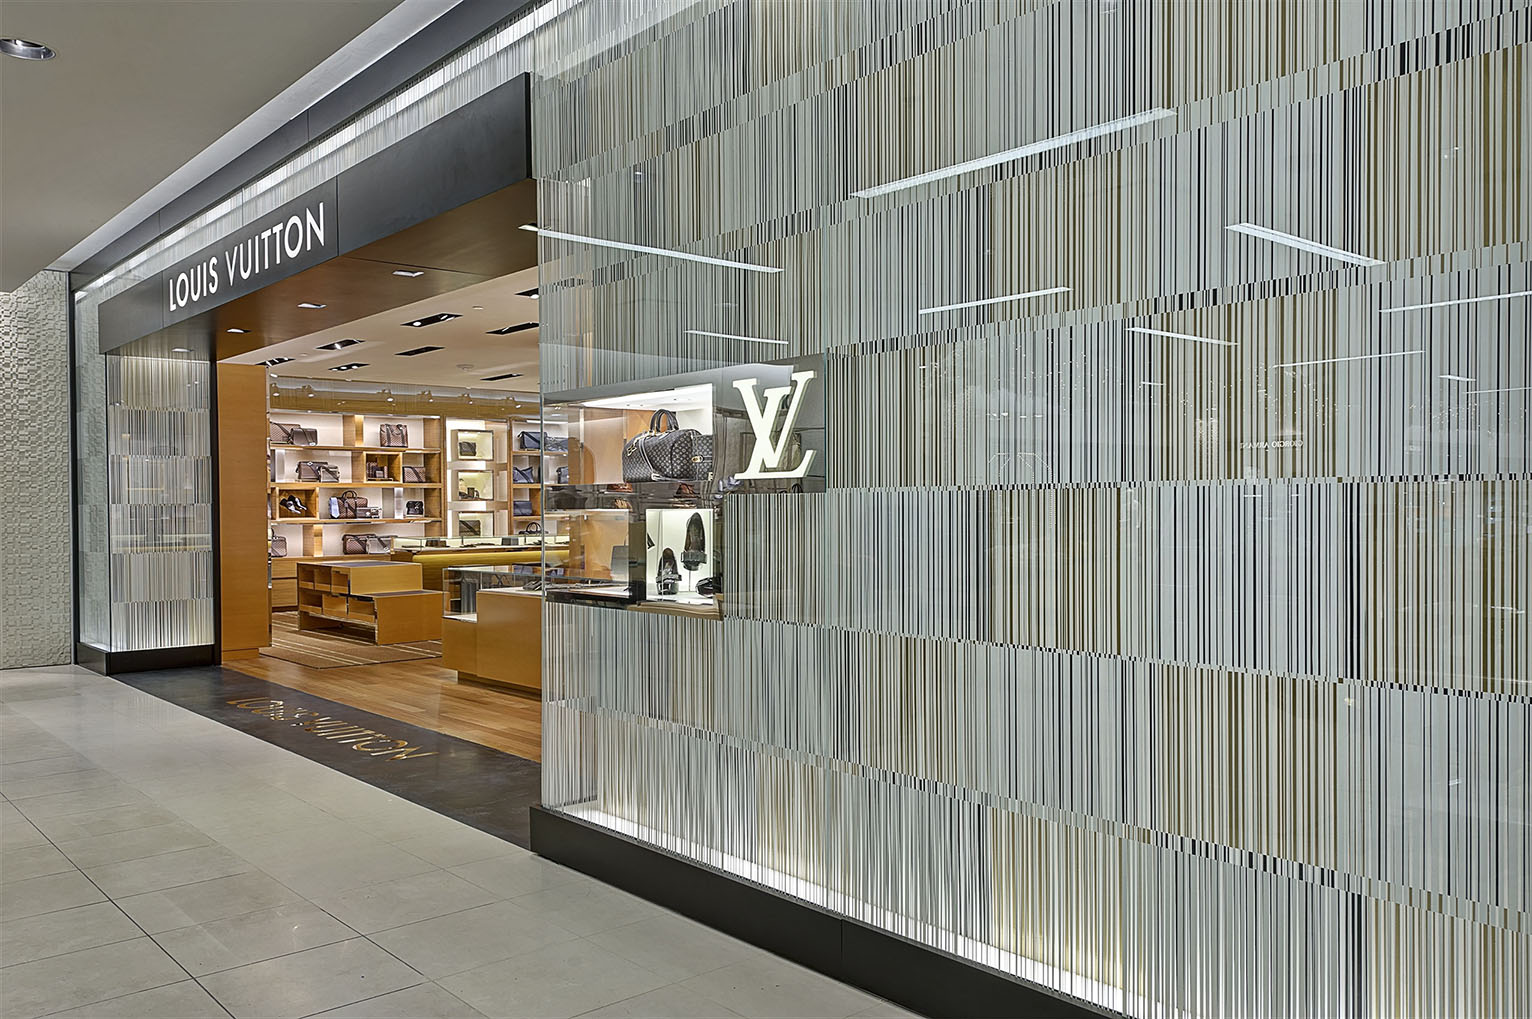 5 Things to See Inside Louis Vuitton's Revamped Canton Road Boutique